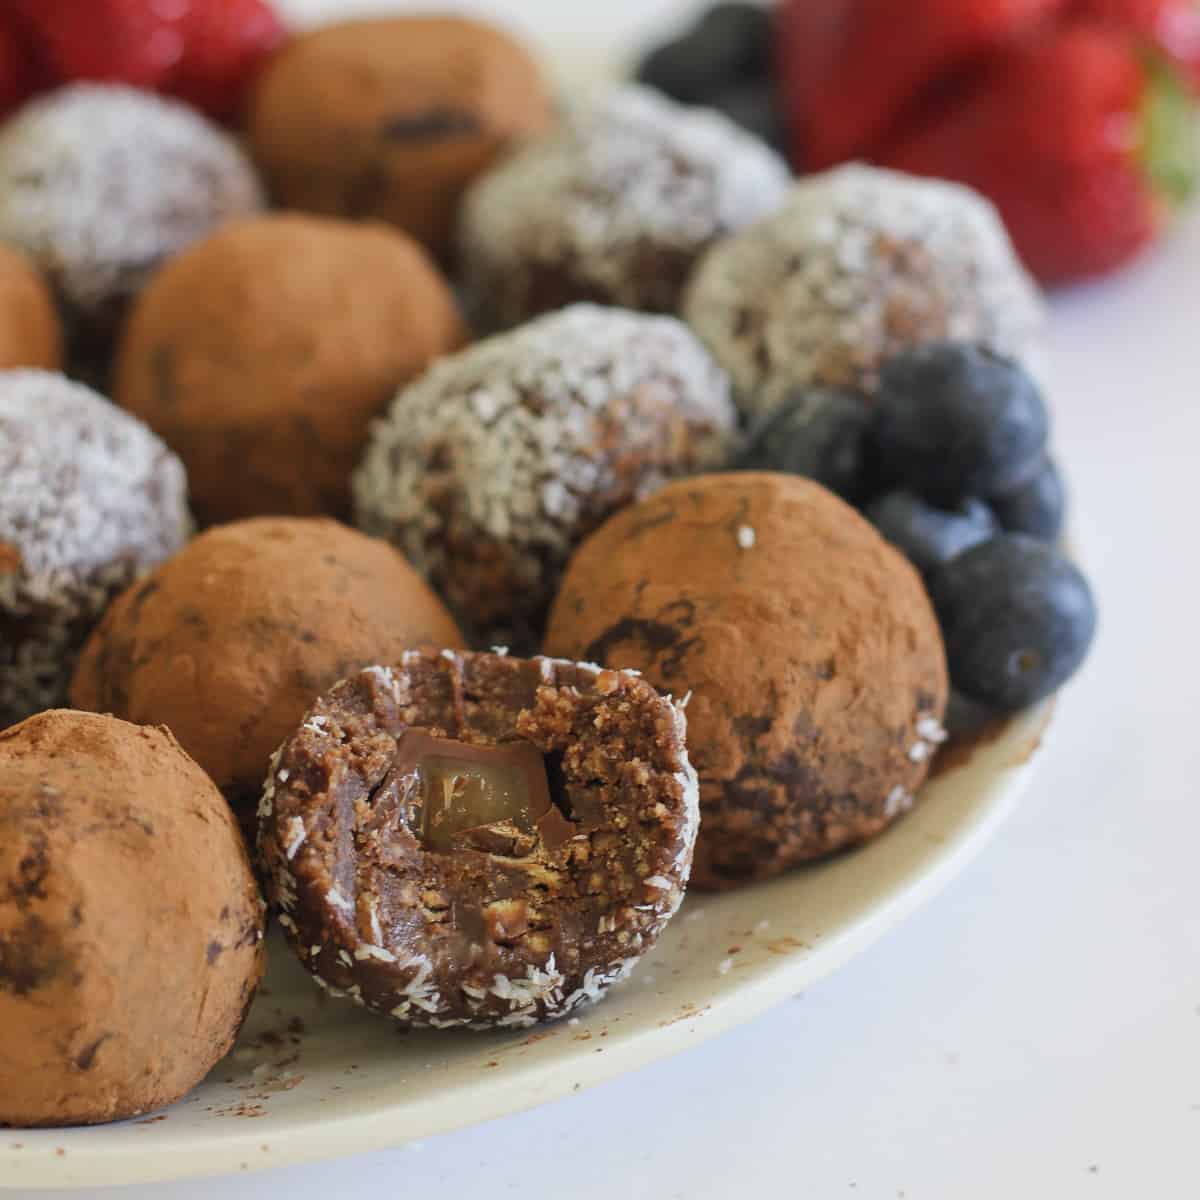 Chocolate truffles on white plate, one with bite taken out. Strawberries in background.